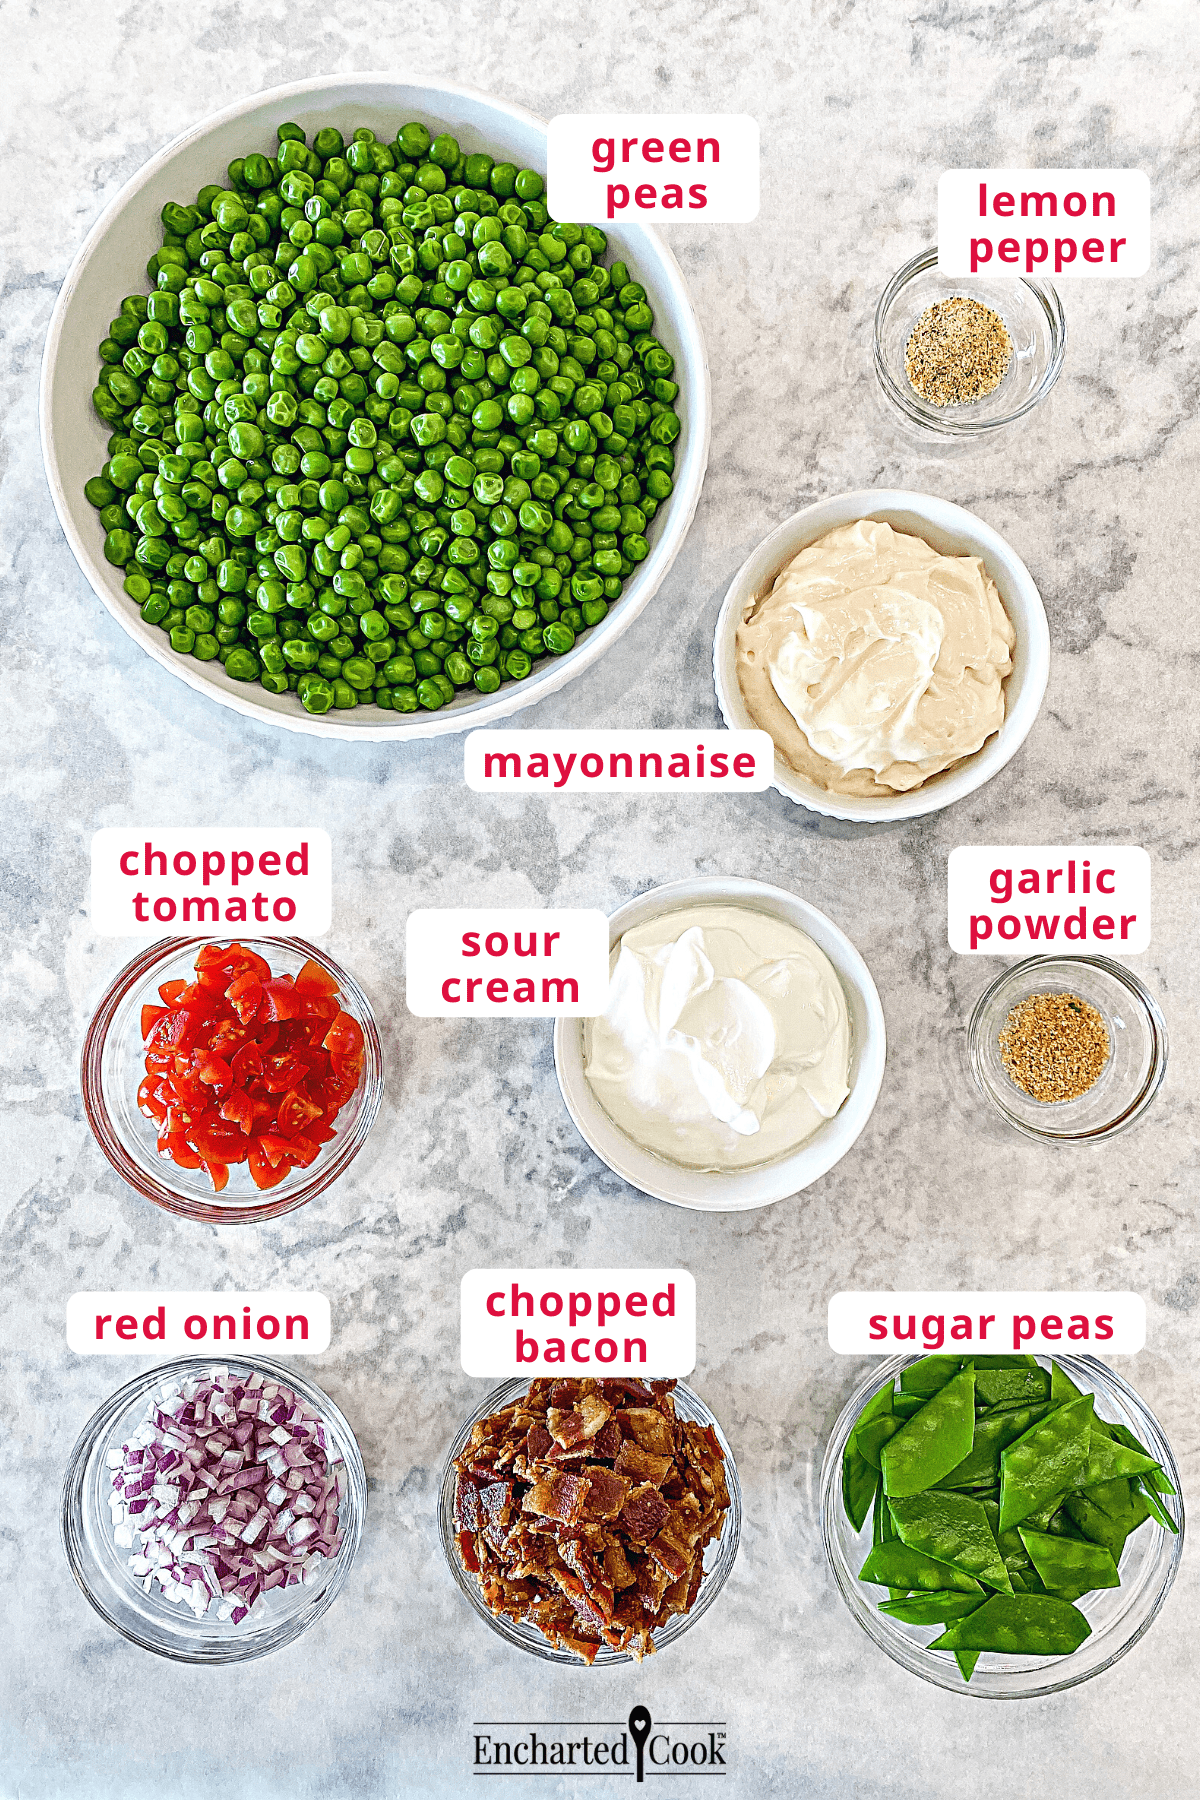 The ingredients, clockwise from top left: green peas, lemon pepper, mayonnaise, sour cream, garlic powder, sugar peas, chopped bacon, minced red onion, and chopped tomato.